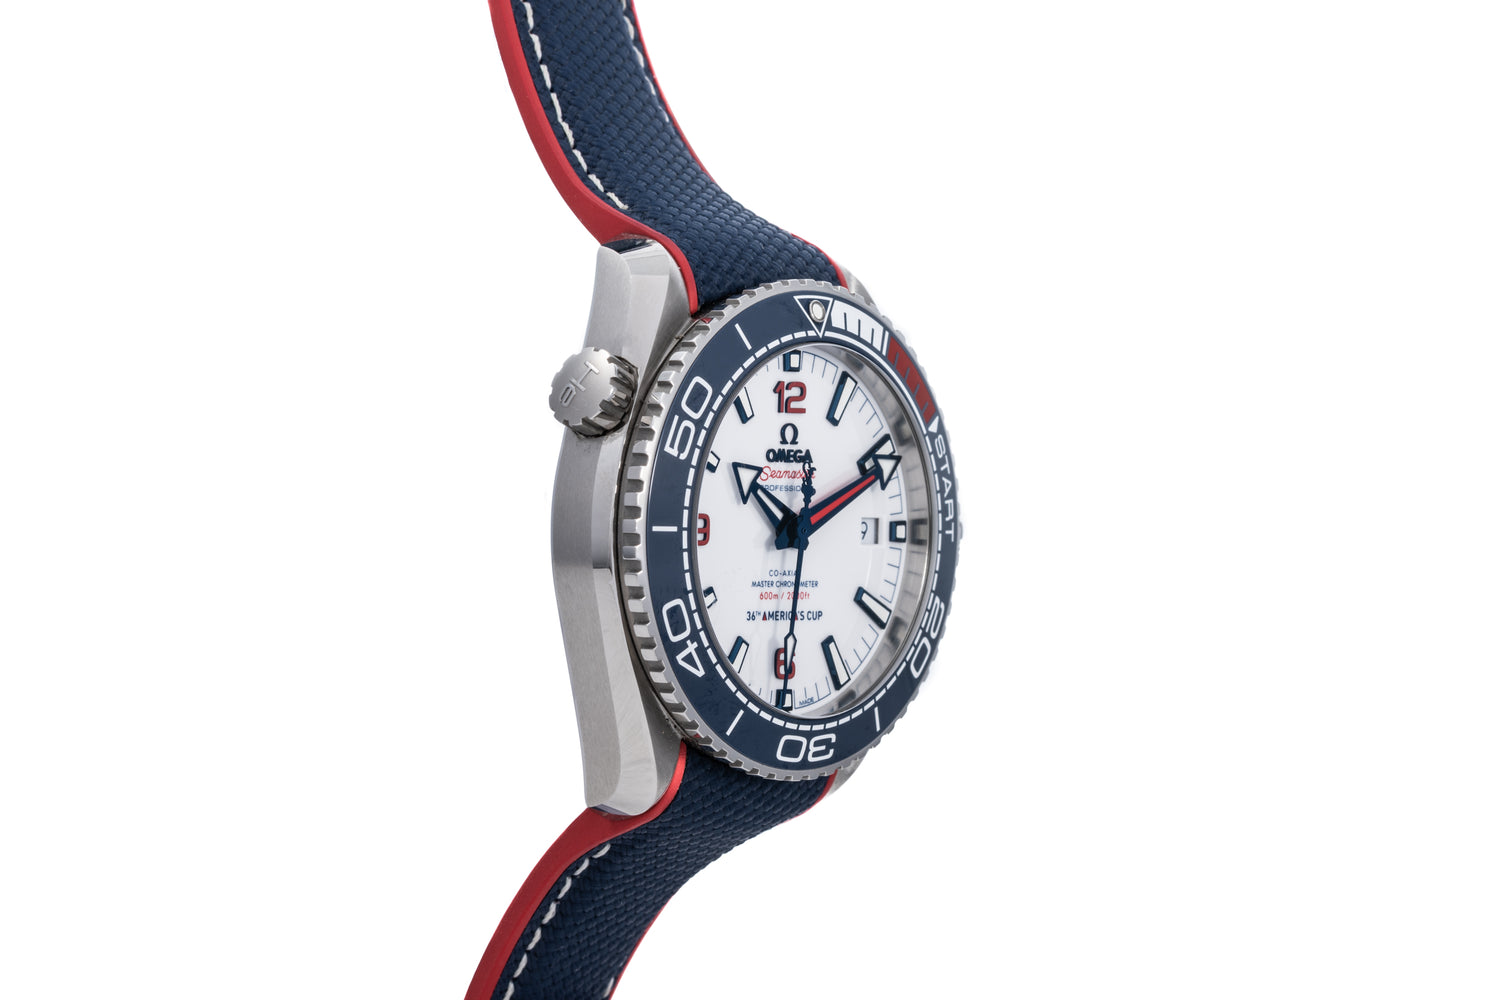 OMEGA Seamaster Planet Ocean 36th America's Cup Announced